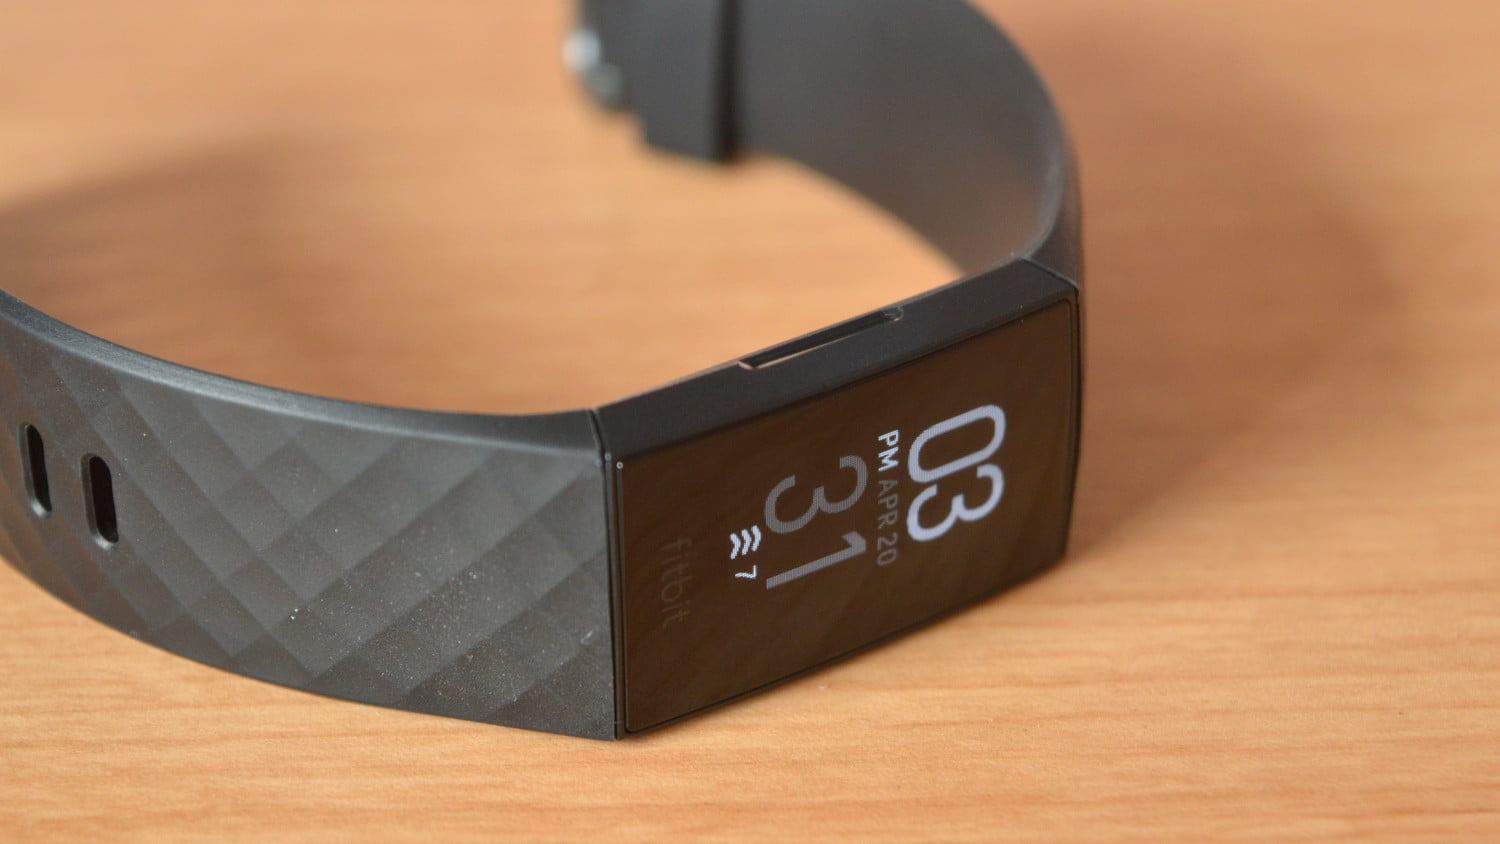 fitbit charge 4 firmware